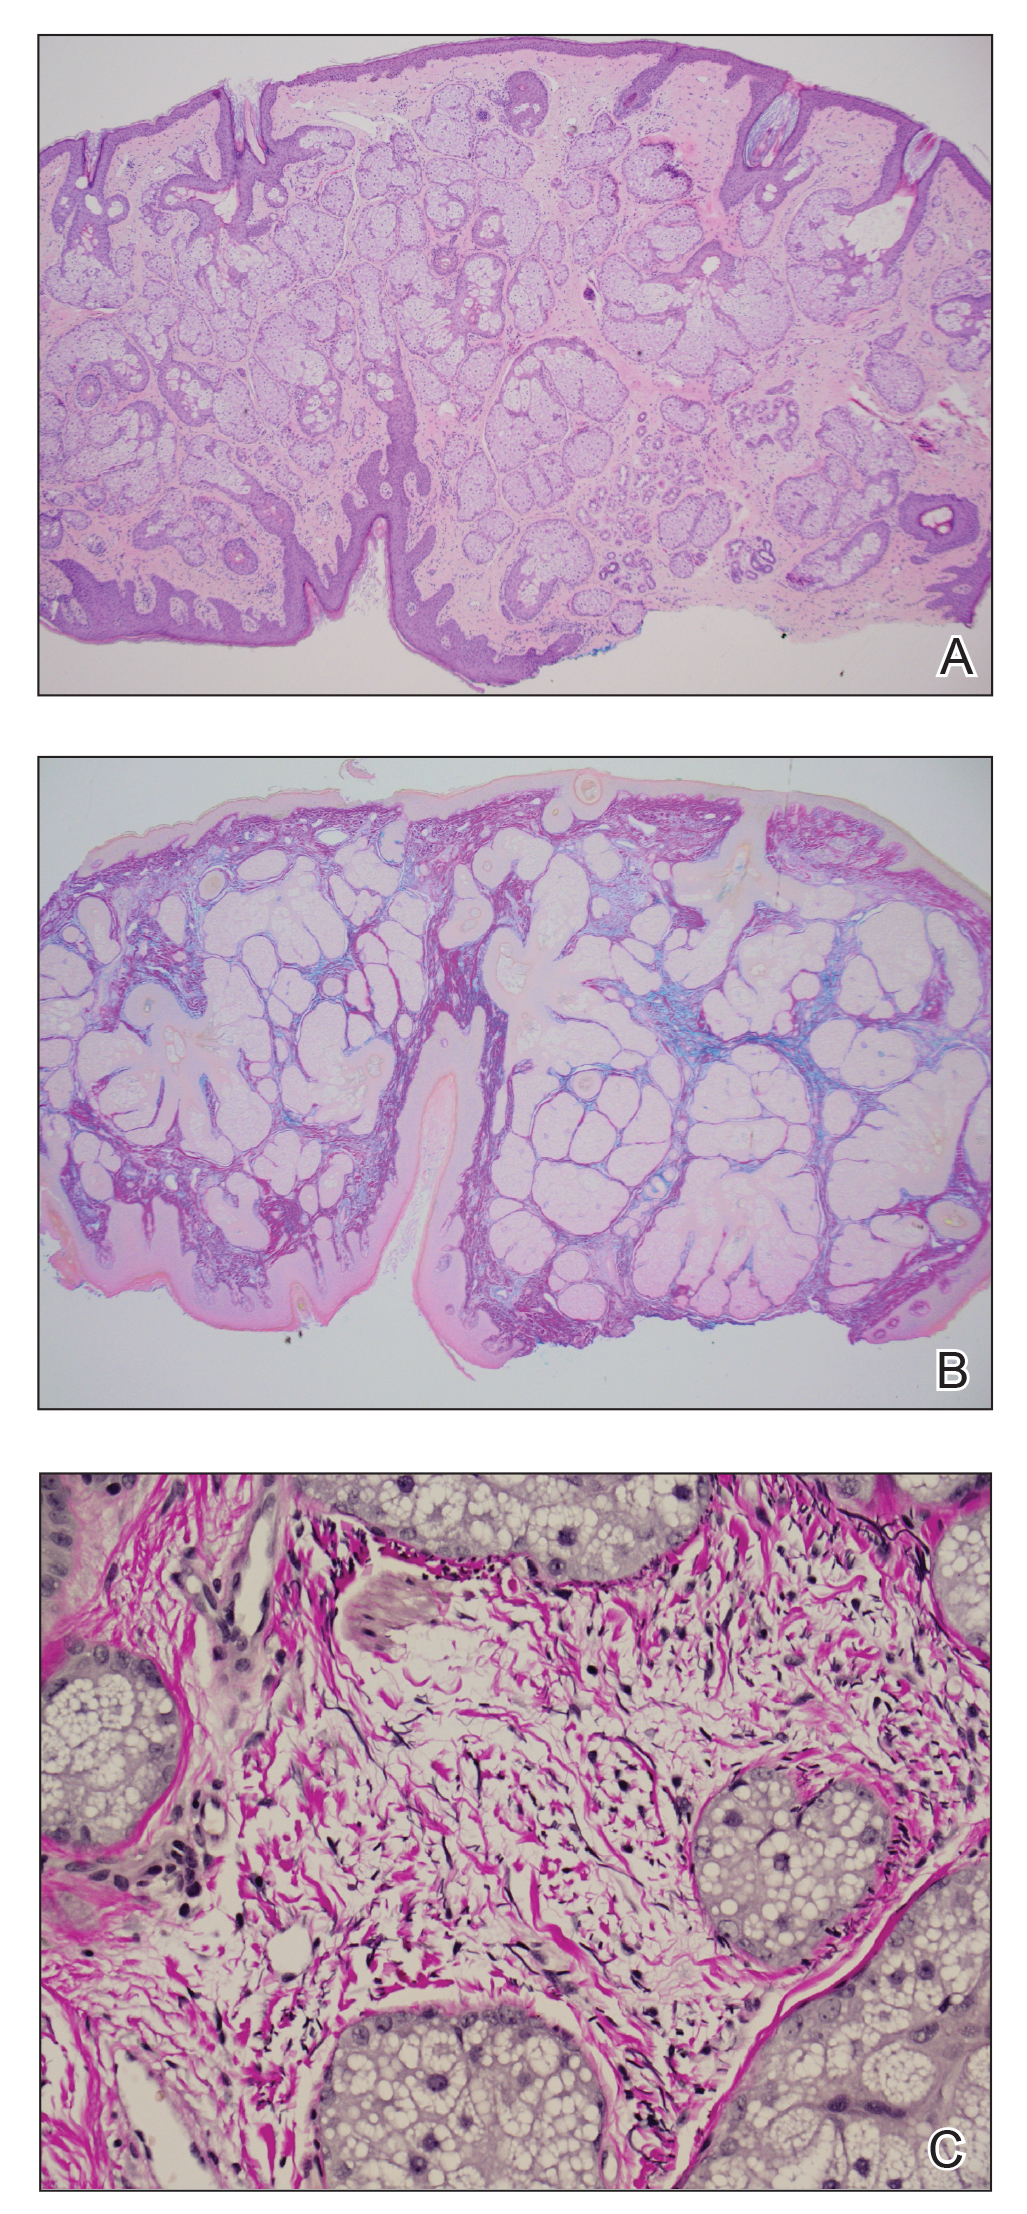 A, Histopathology of a forehead biopsy showed increased sebaceous gland occupation (H&E, original magnification ×4). B, Colloidal iron stain demonstrated increased mucin (original magnification ×4). C, Verhoeff-van Gieson stain showed elastic fiber